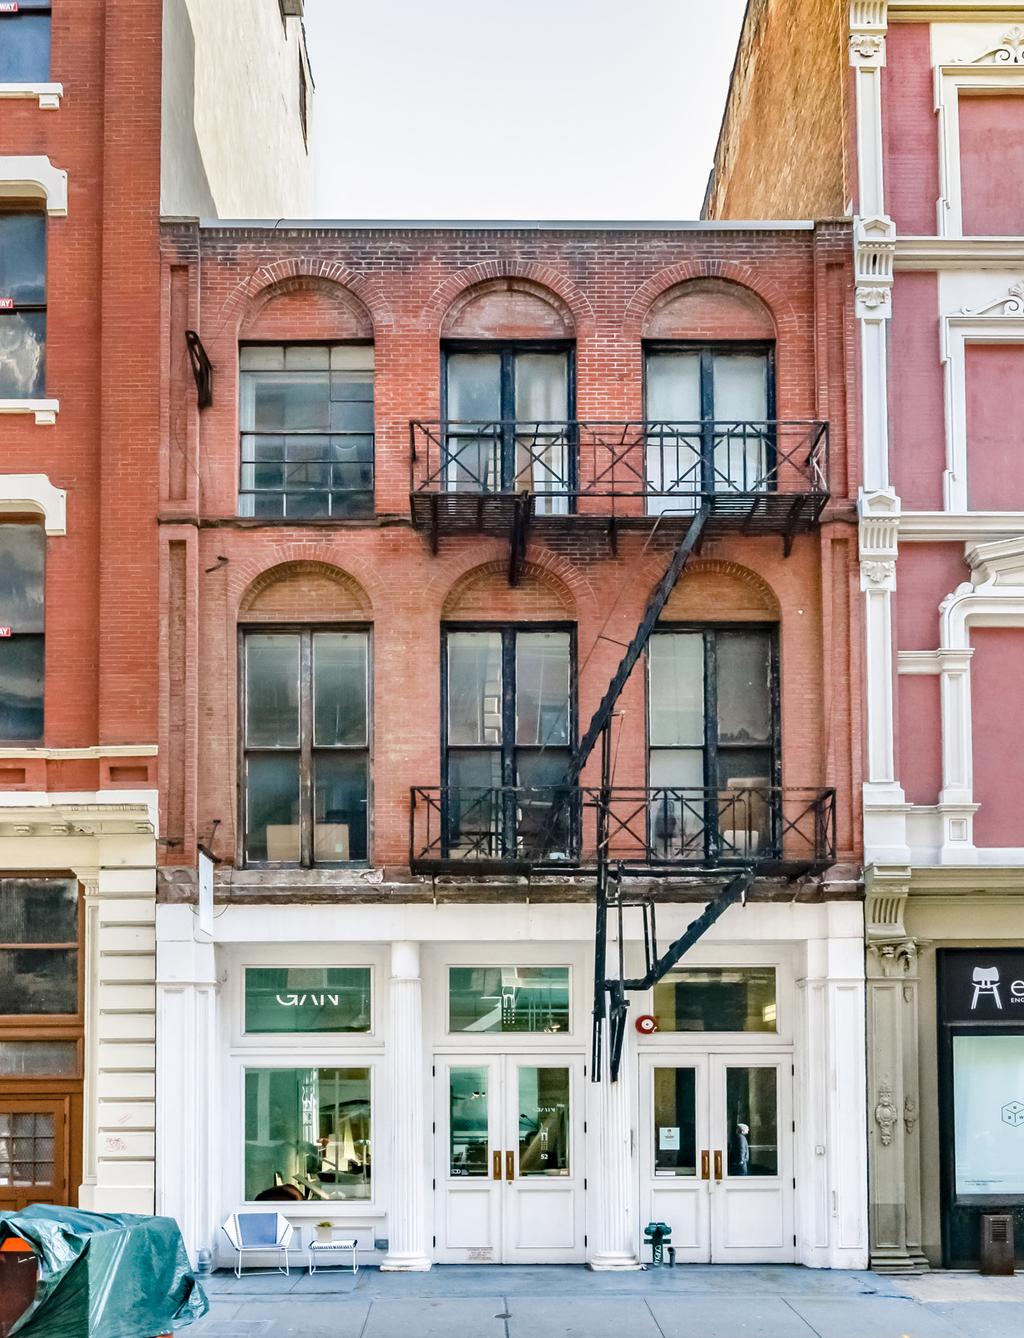 Ideal User or Flagship Store Opportunity Long Term Ownership over 50 Years Marcus & Millichap is pleased to offer, located between Grand Street and Broome Street